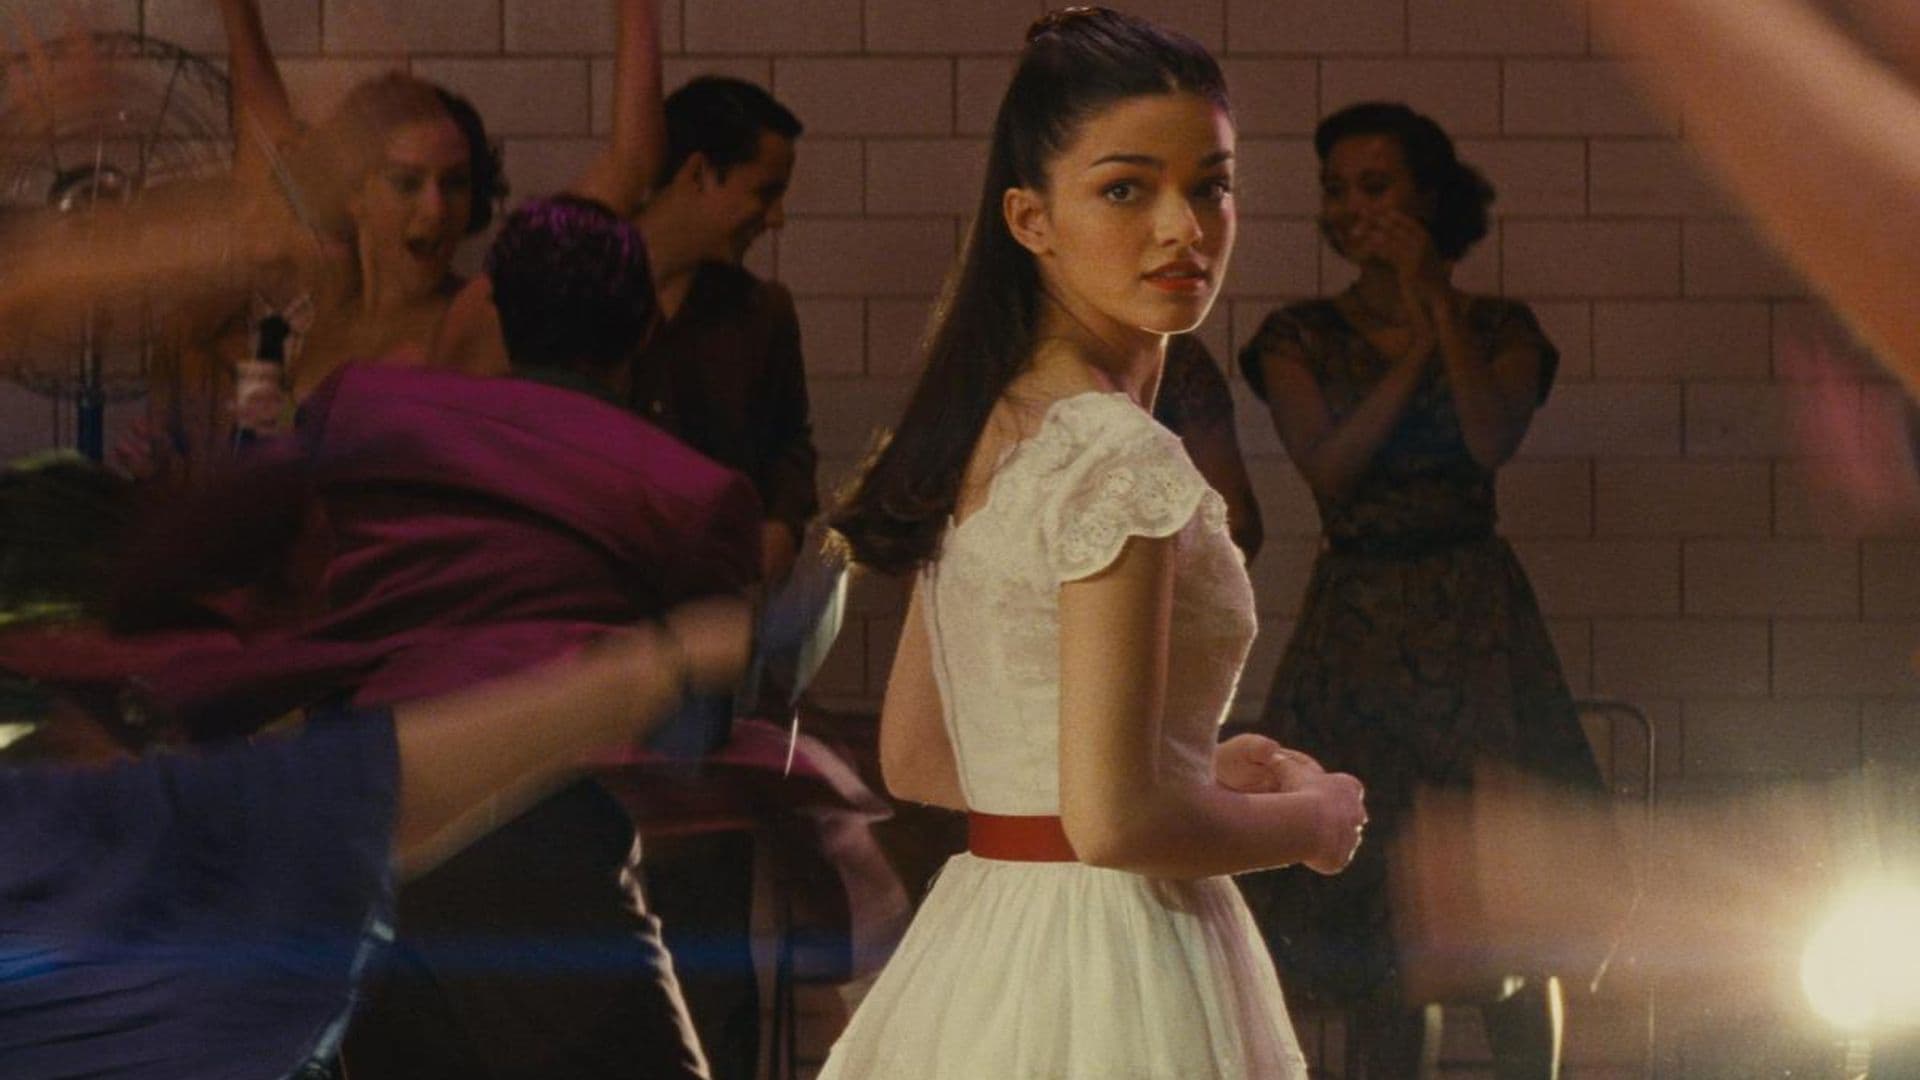 How to watch Steven Spielberg’s ‘West Side Story’ at home